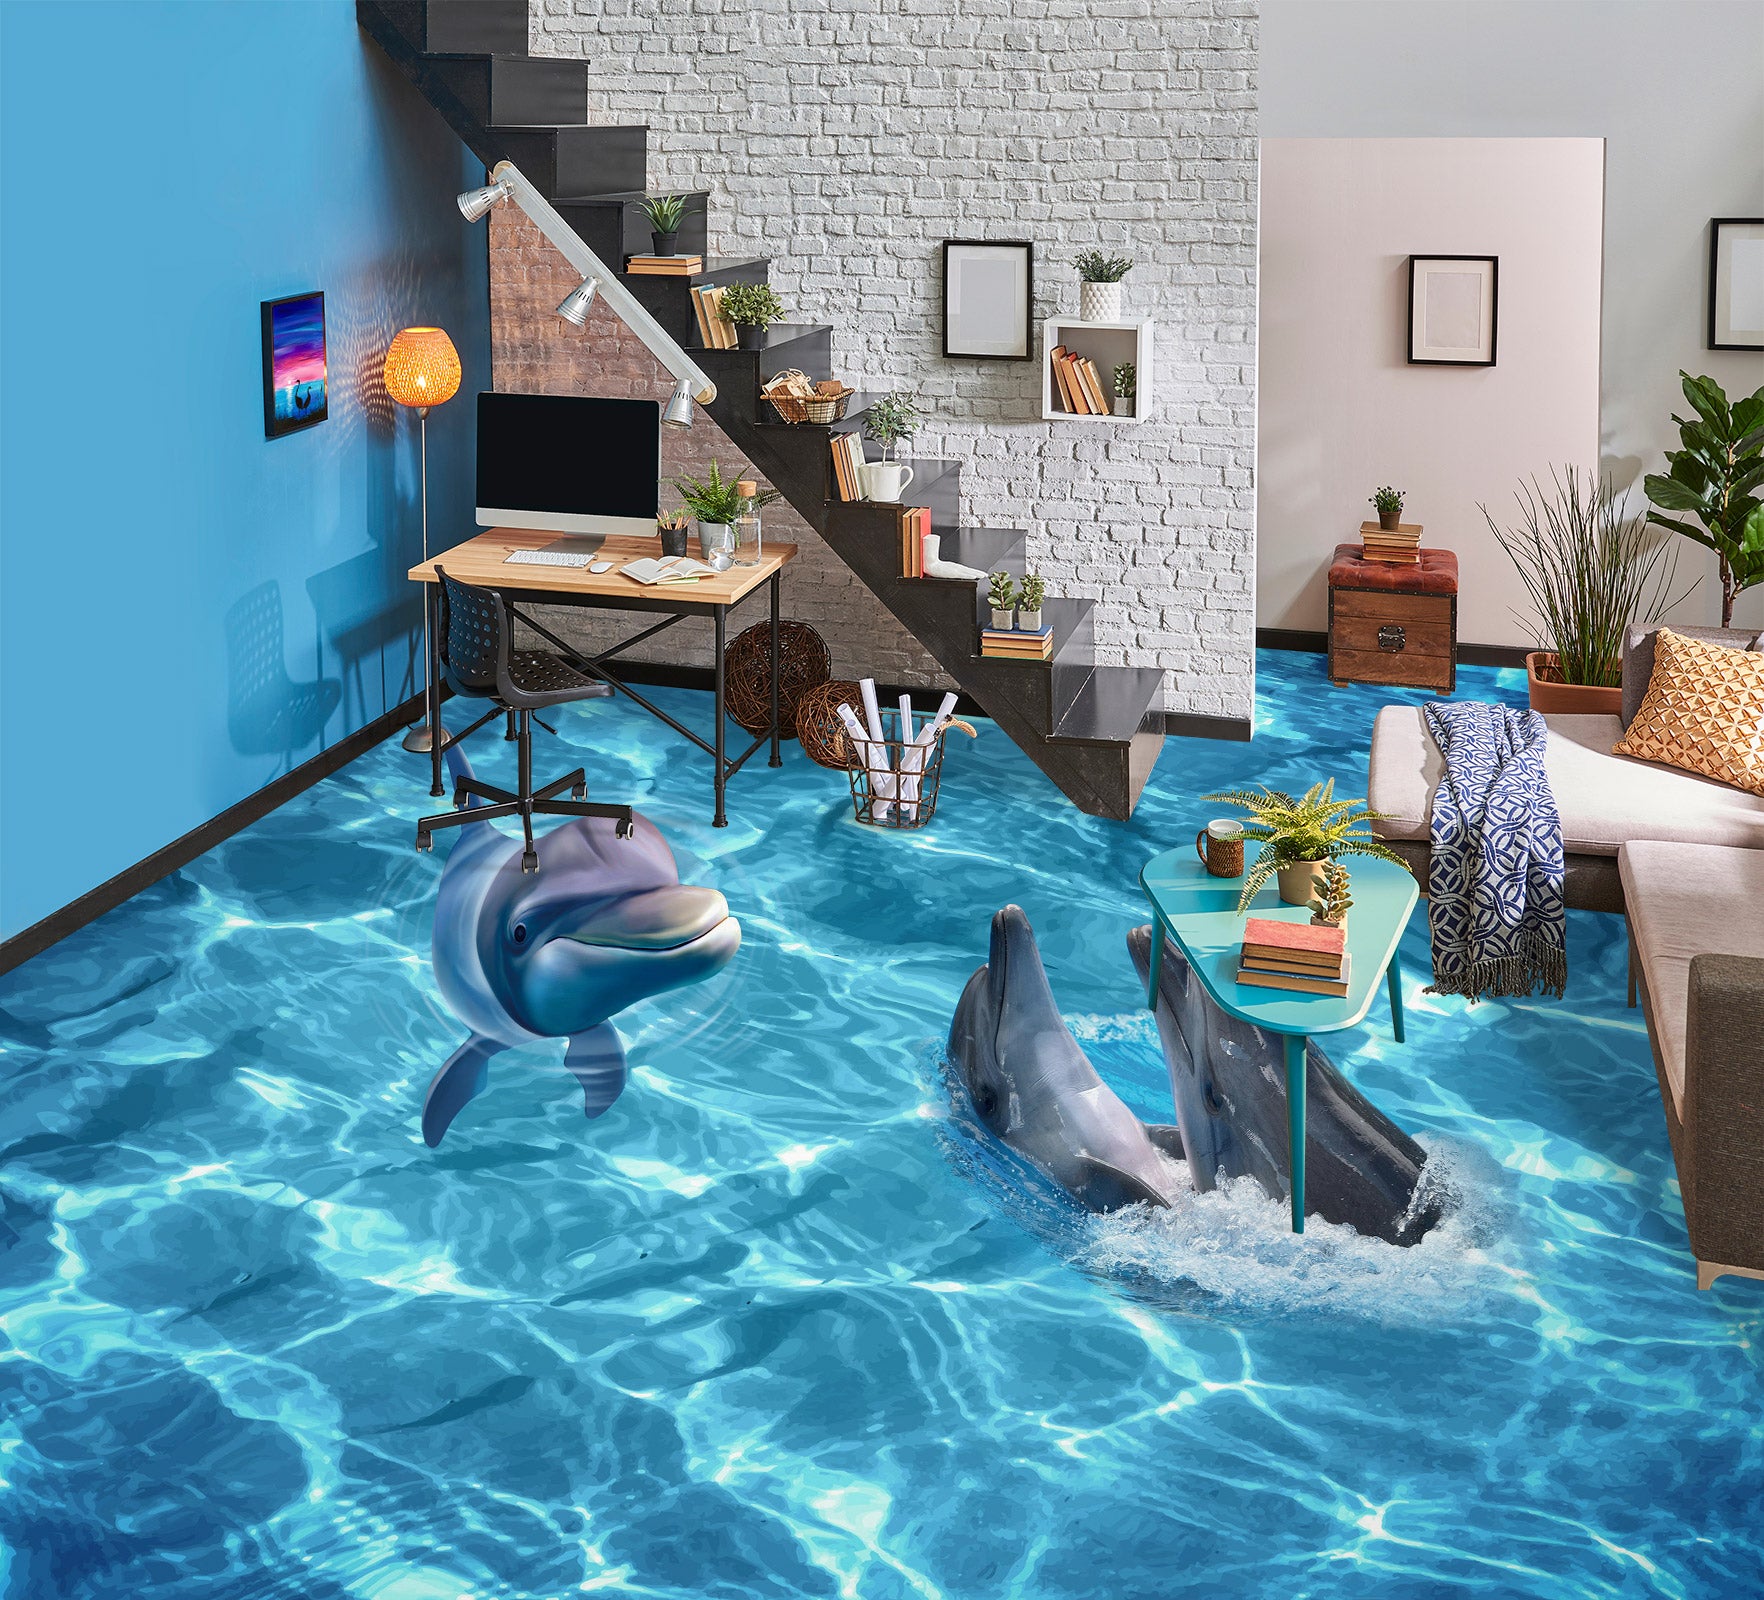 3D Encounter Of Dolphins 1333 Floor Mural  Wallpaper Murals Self-Adhesive Removable Print Epoxy